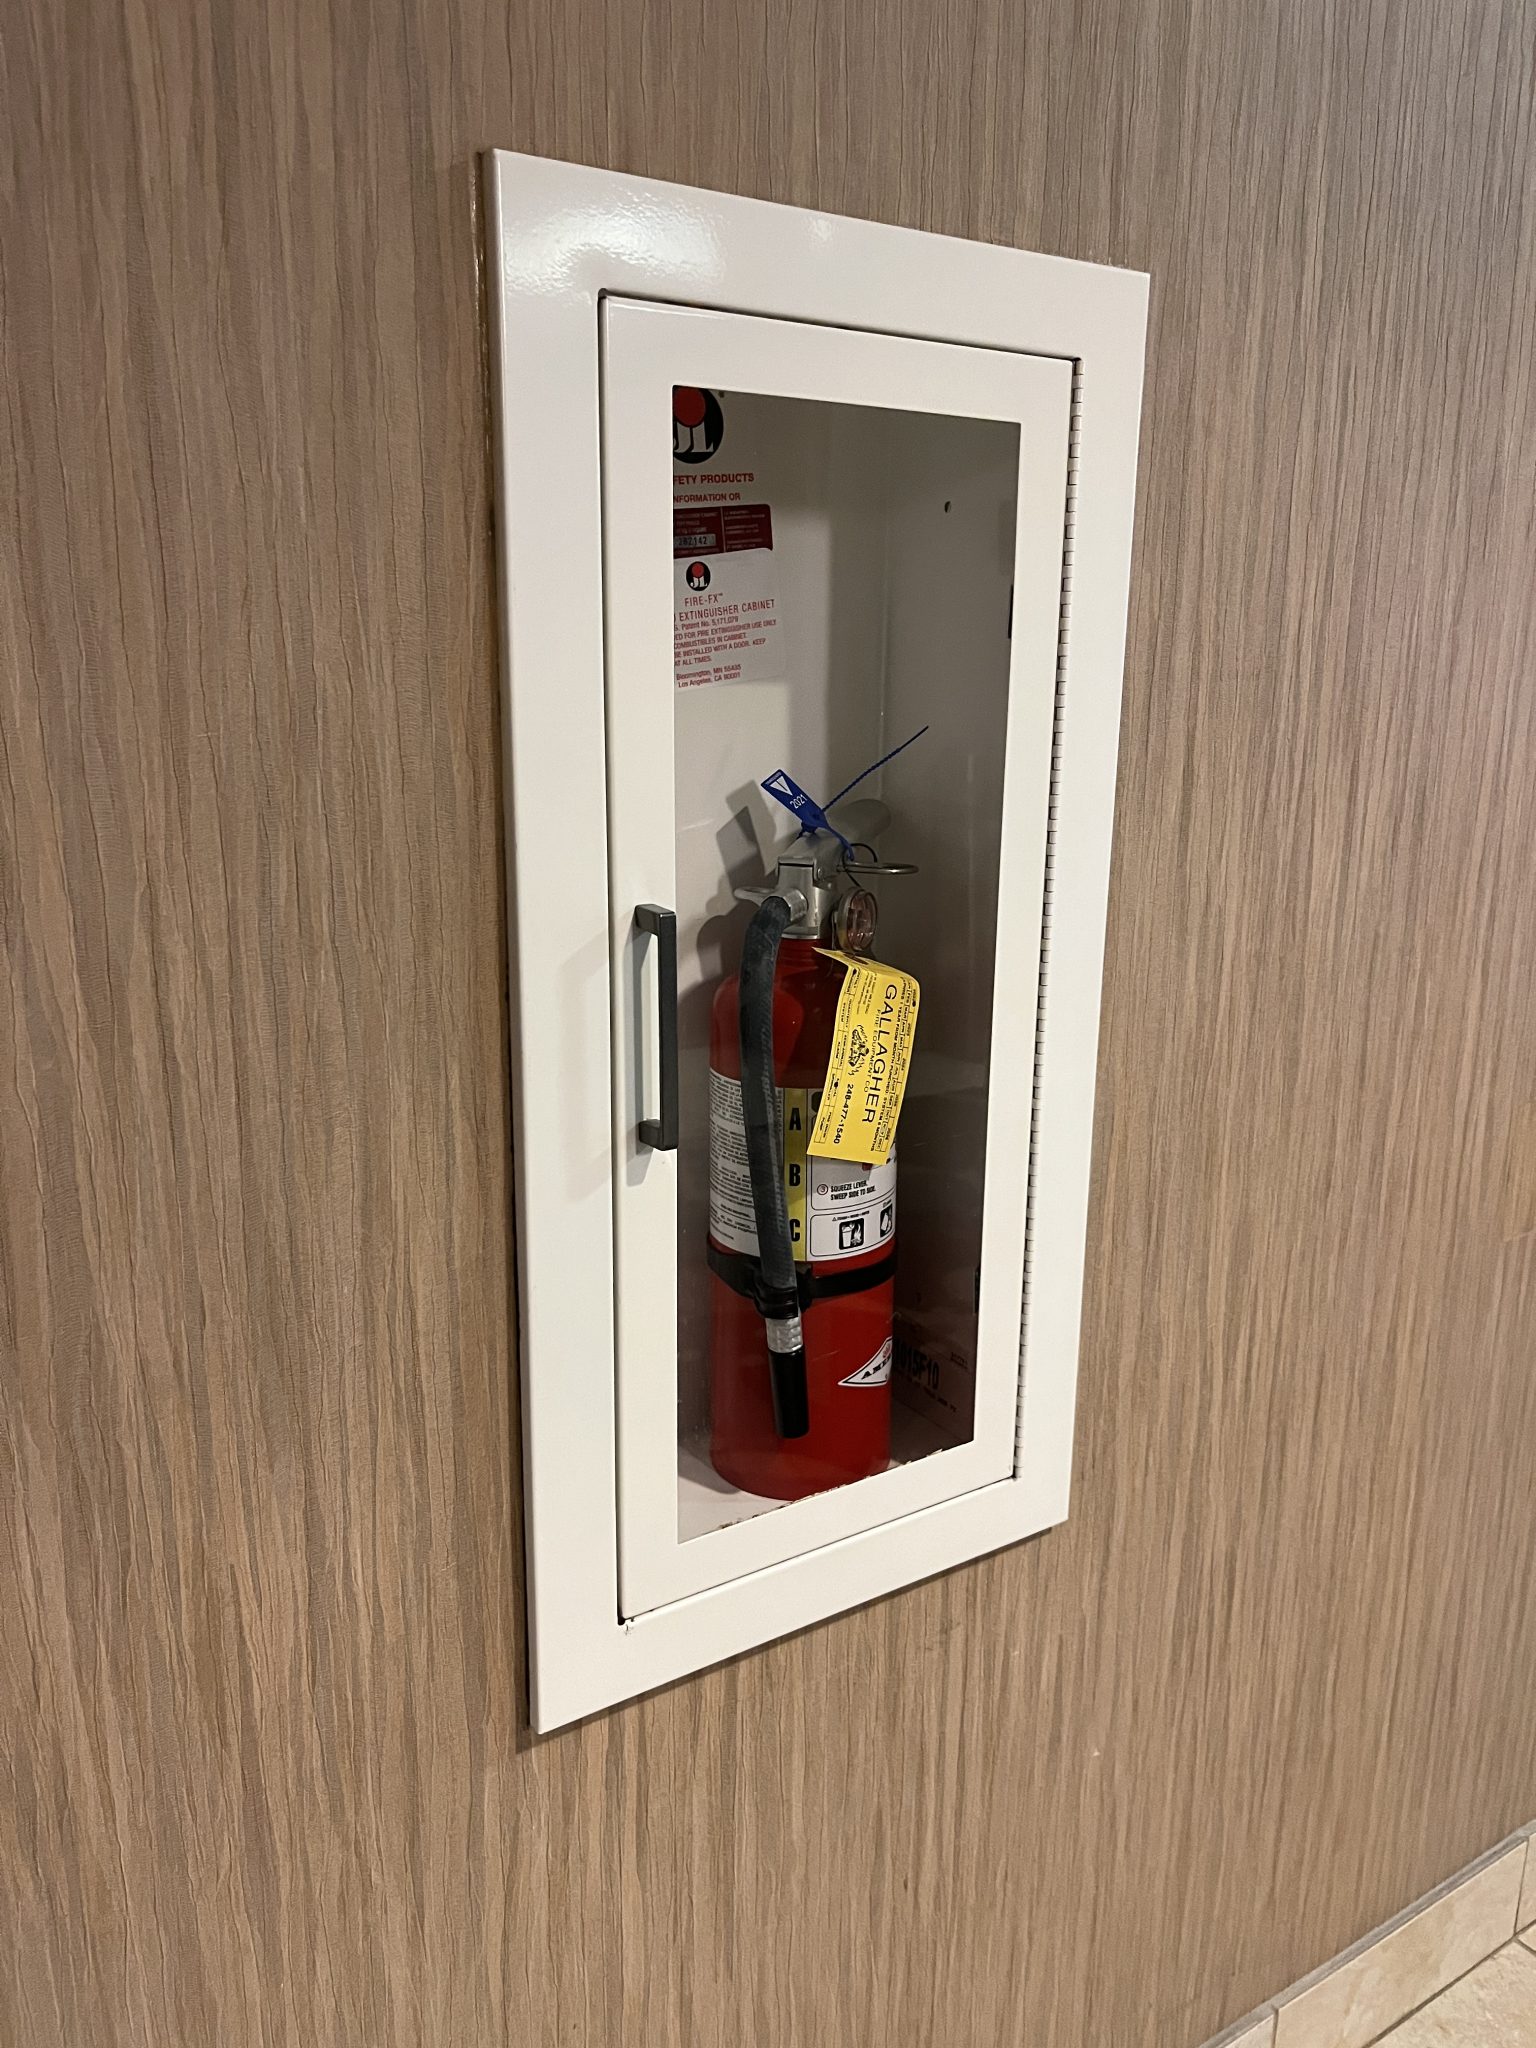 Handheld fire extinguisher in alcove behind glass.